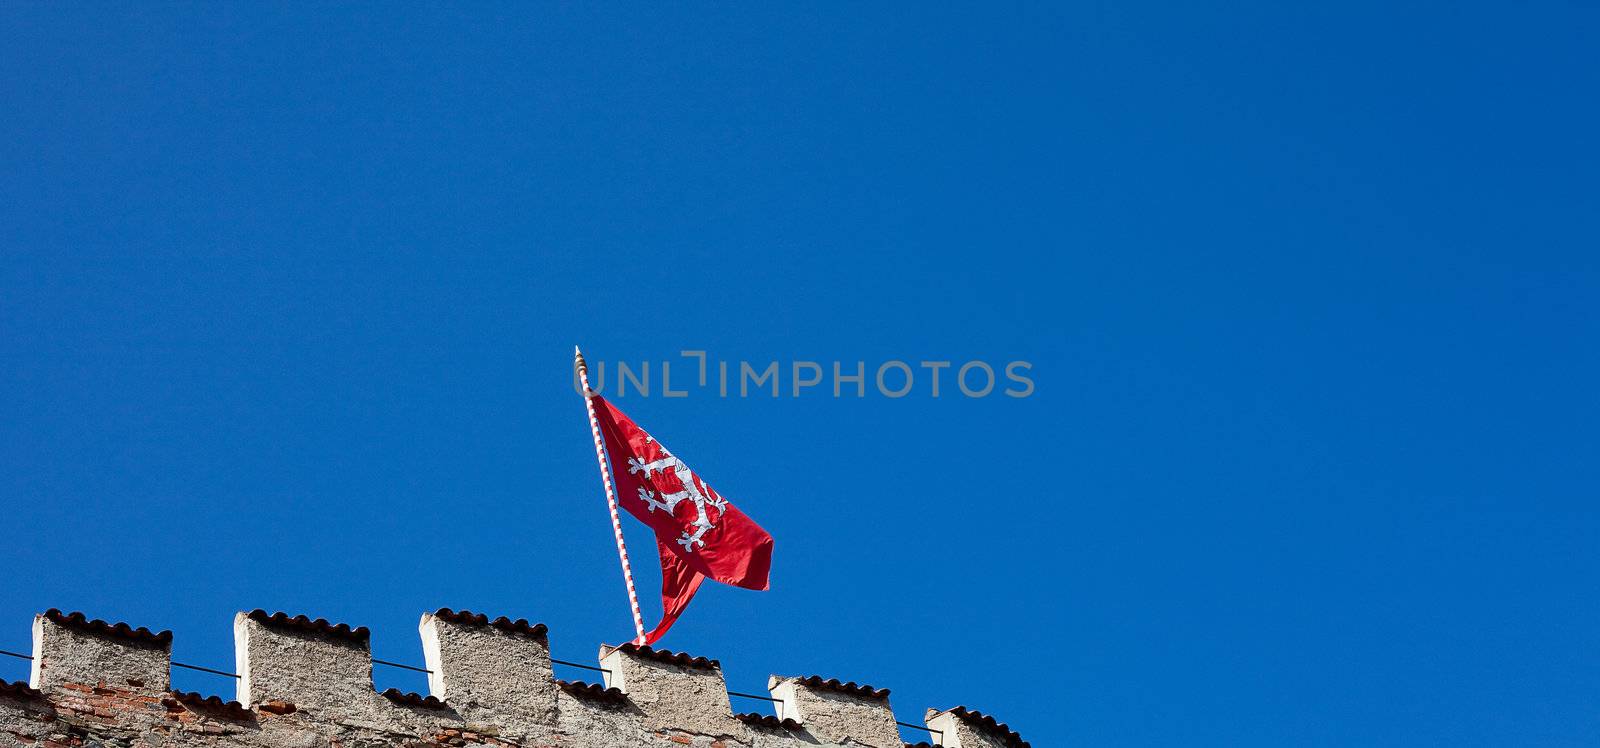 red flag of the fortress against the blue sky by jannyjus